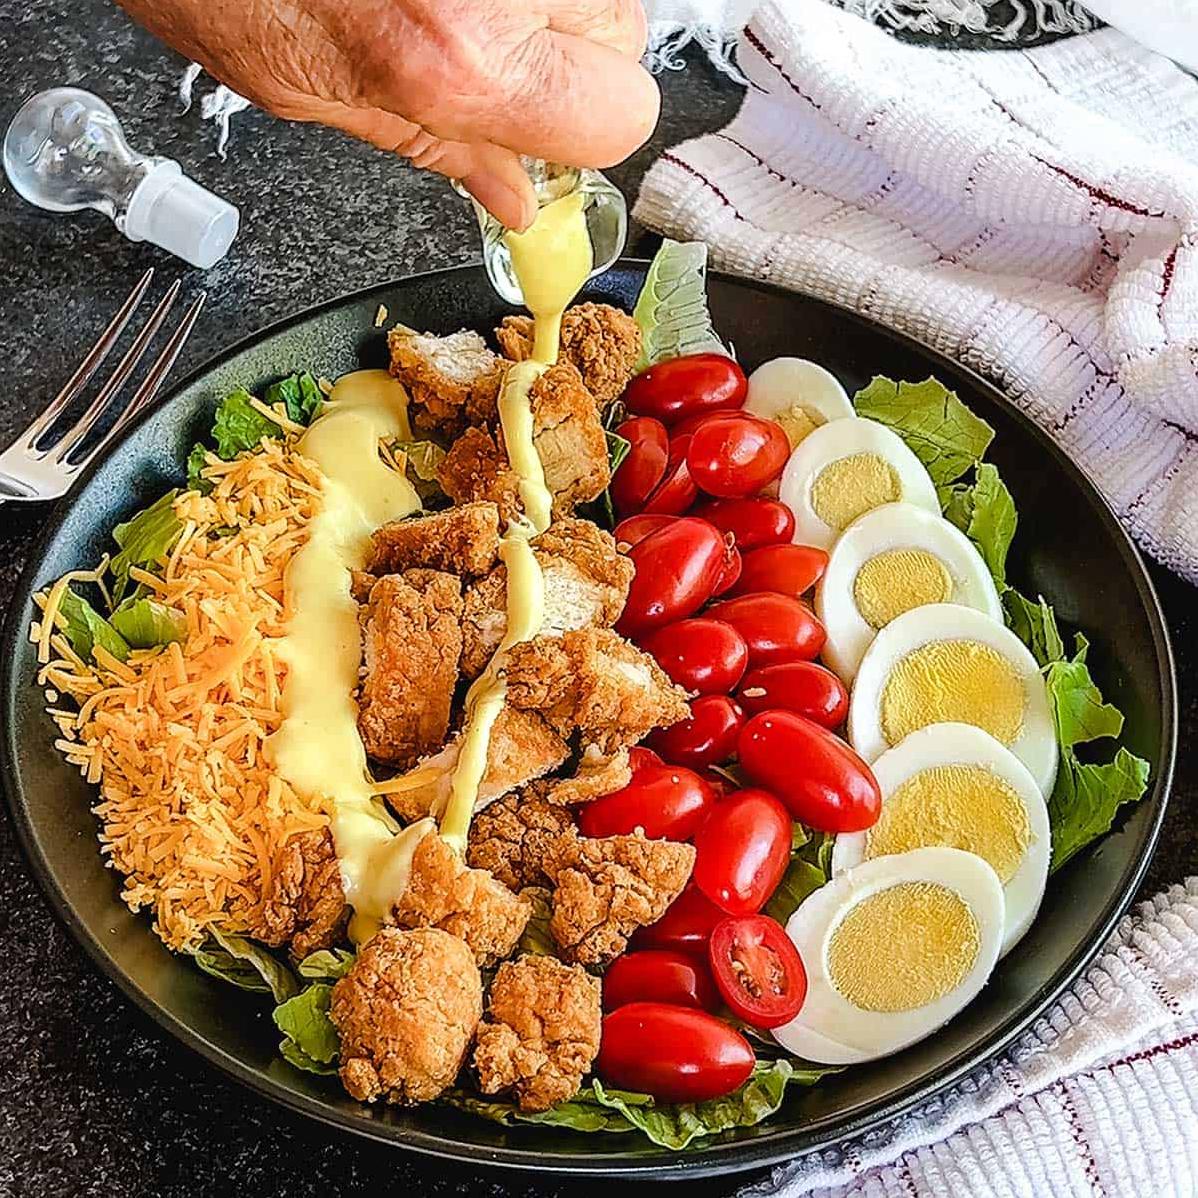  Golden brown and delicious: Southern fried chicken salad